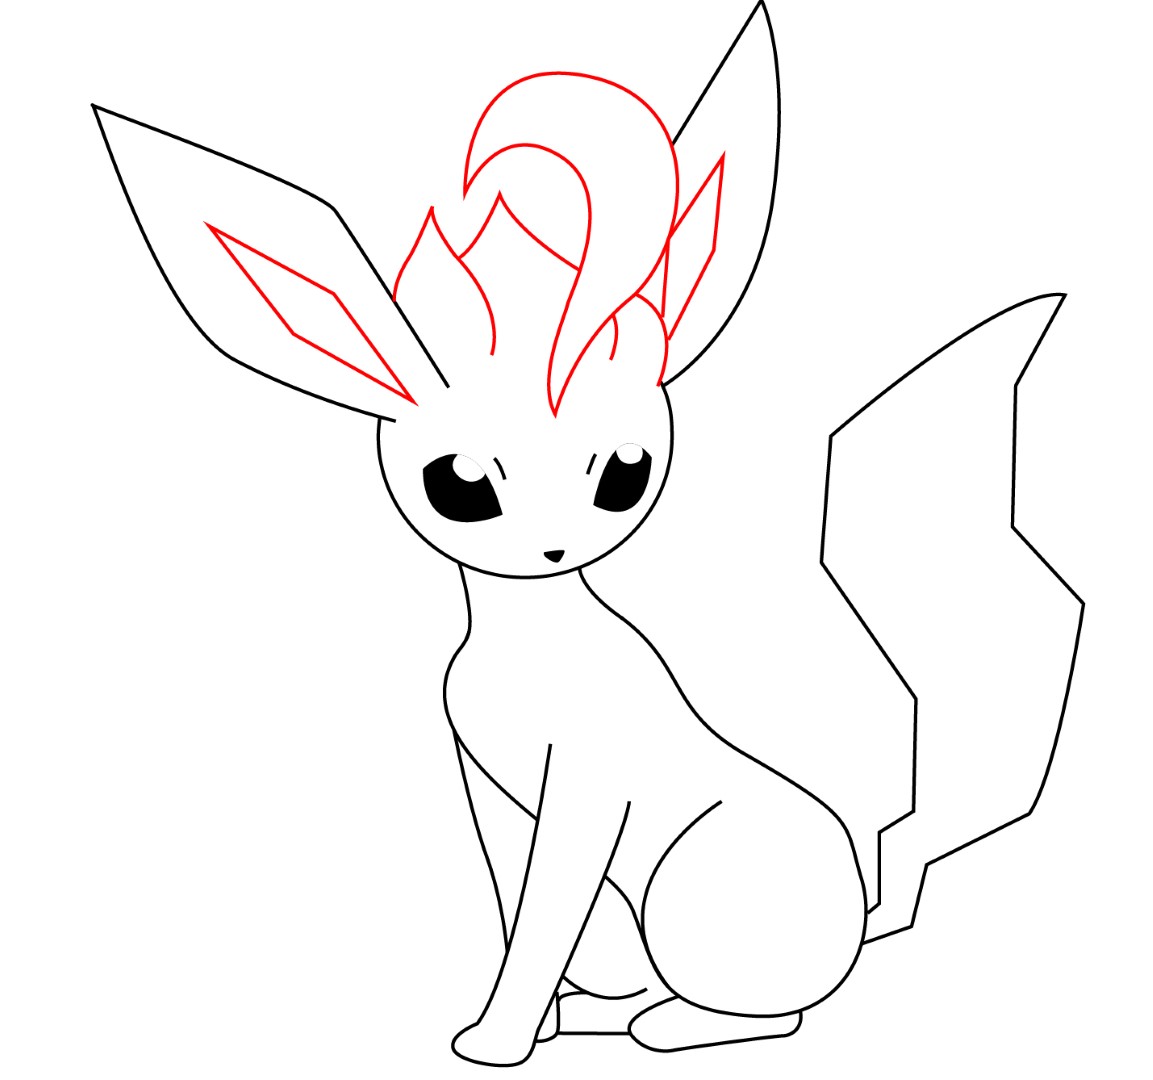 How To Draw Leafeon.